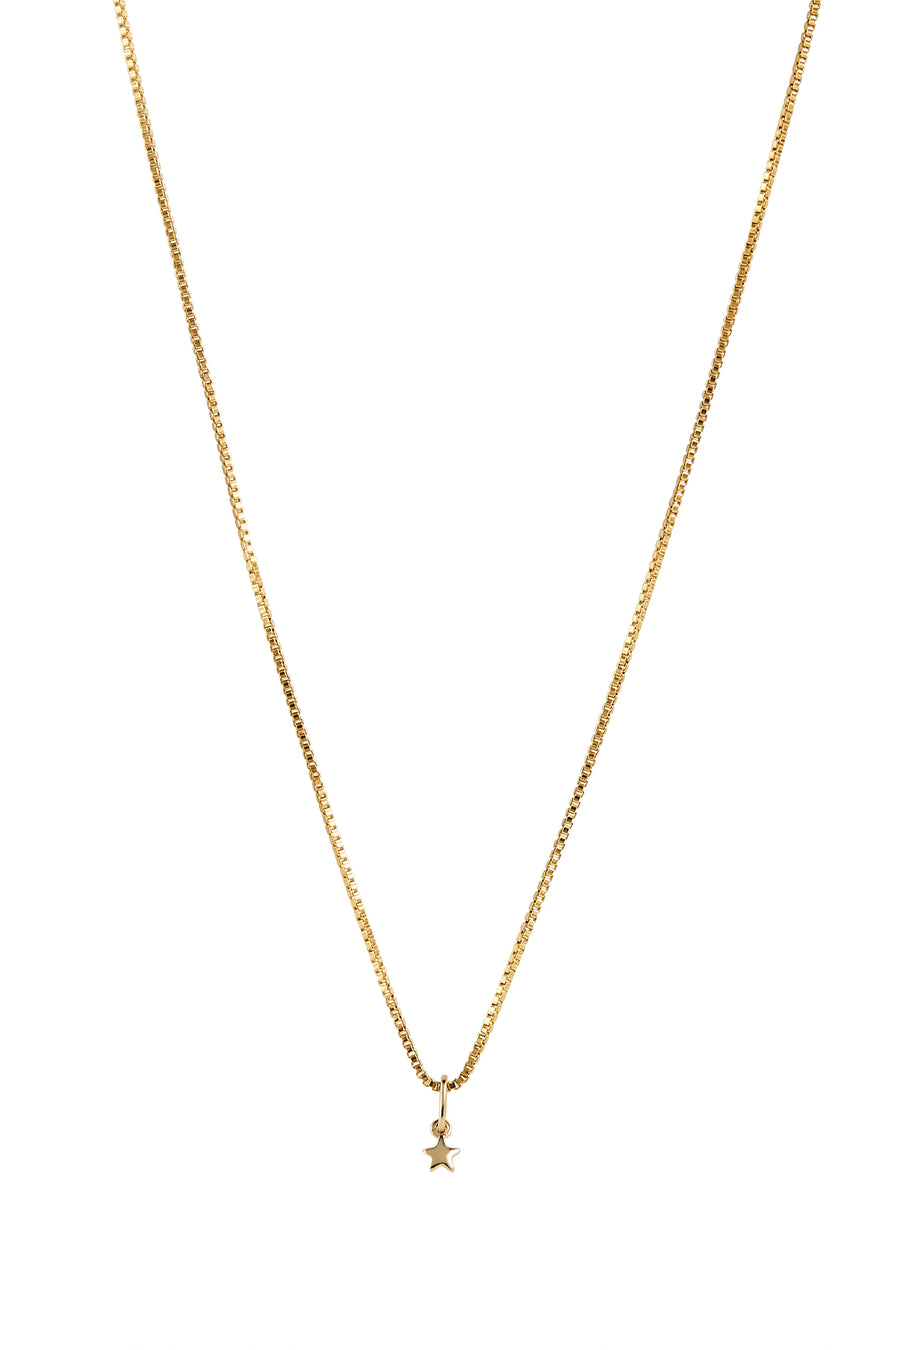 LISBETH JEWELRY - STELLA NECKLACE - FILLED GOLD